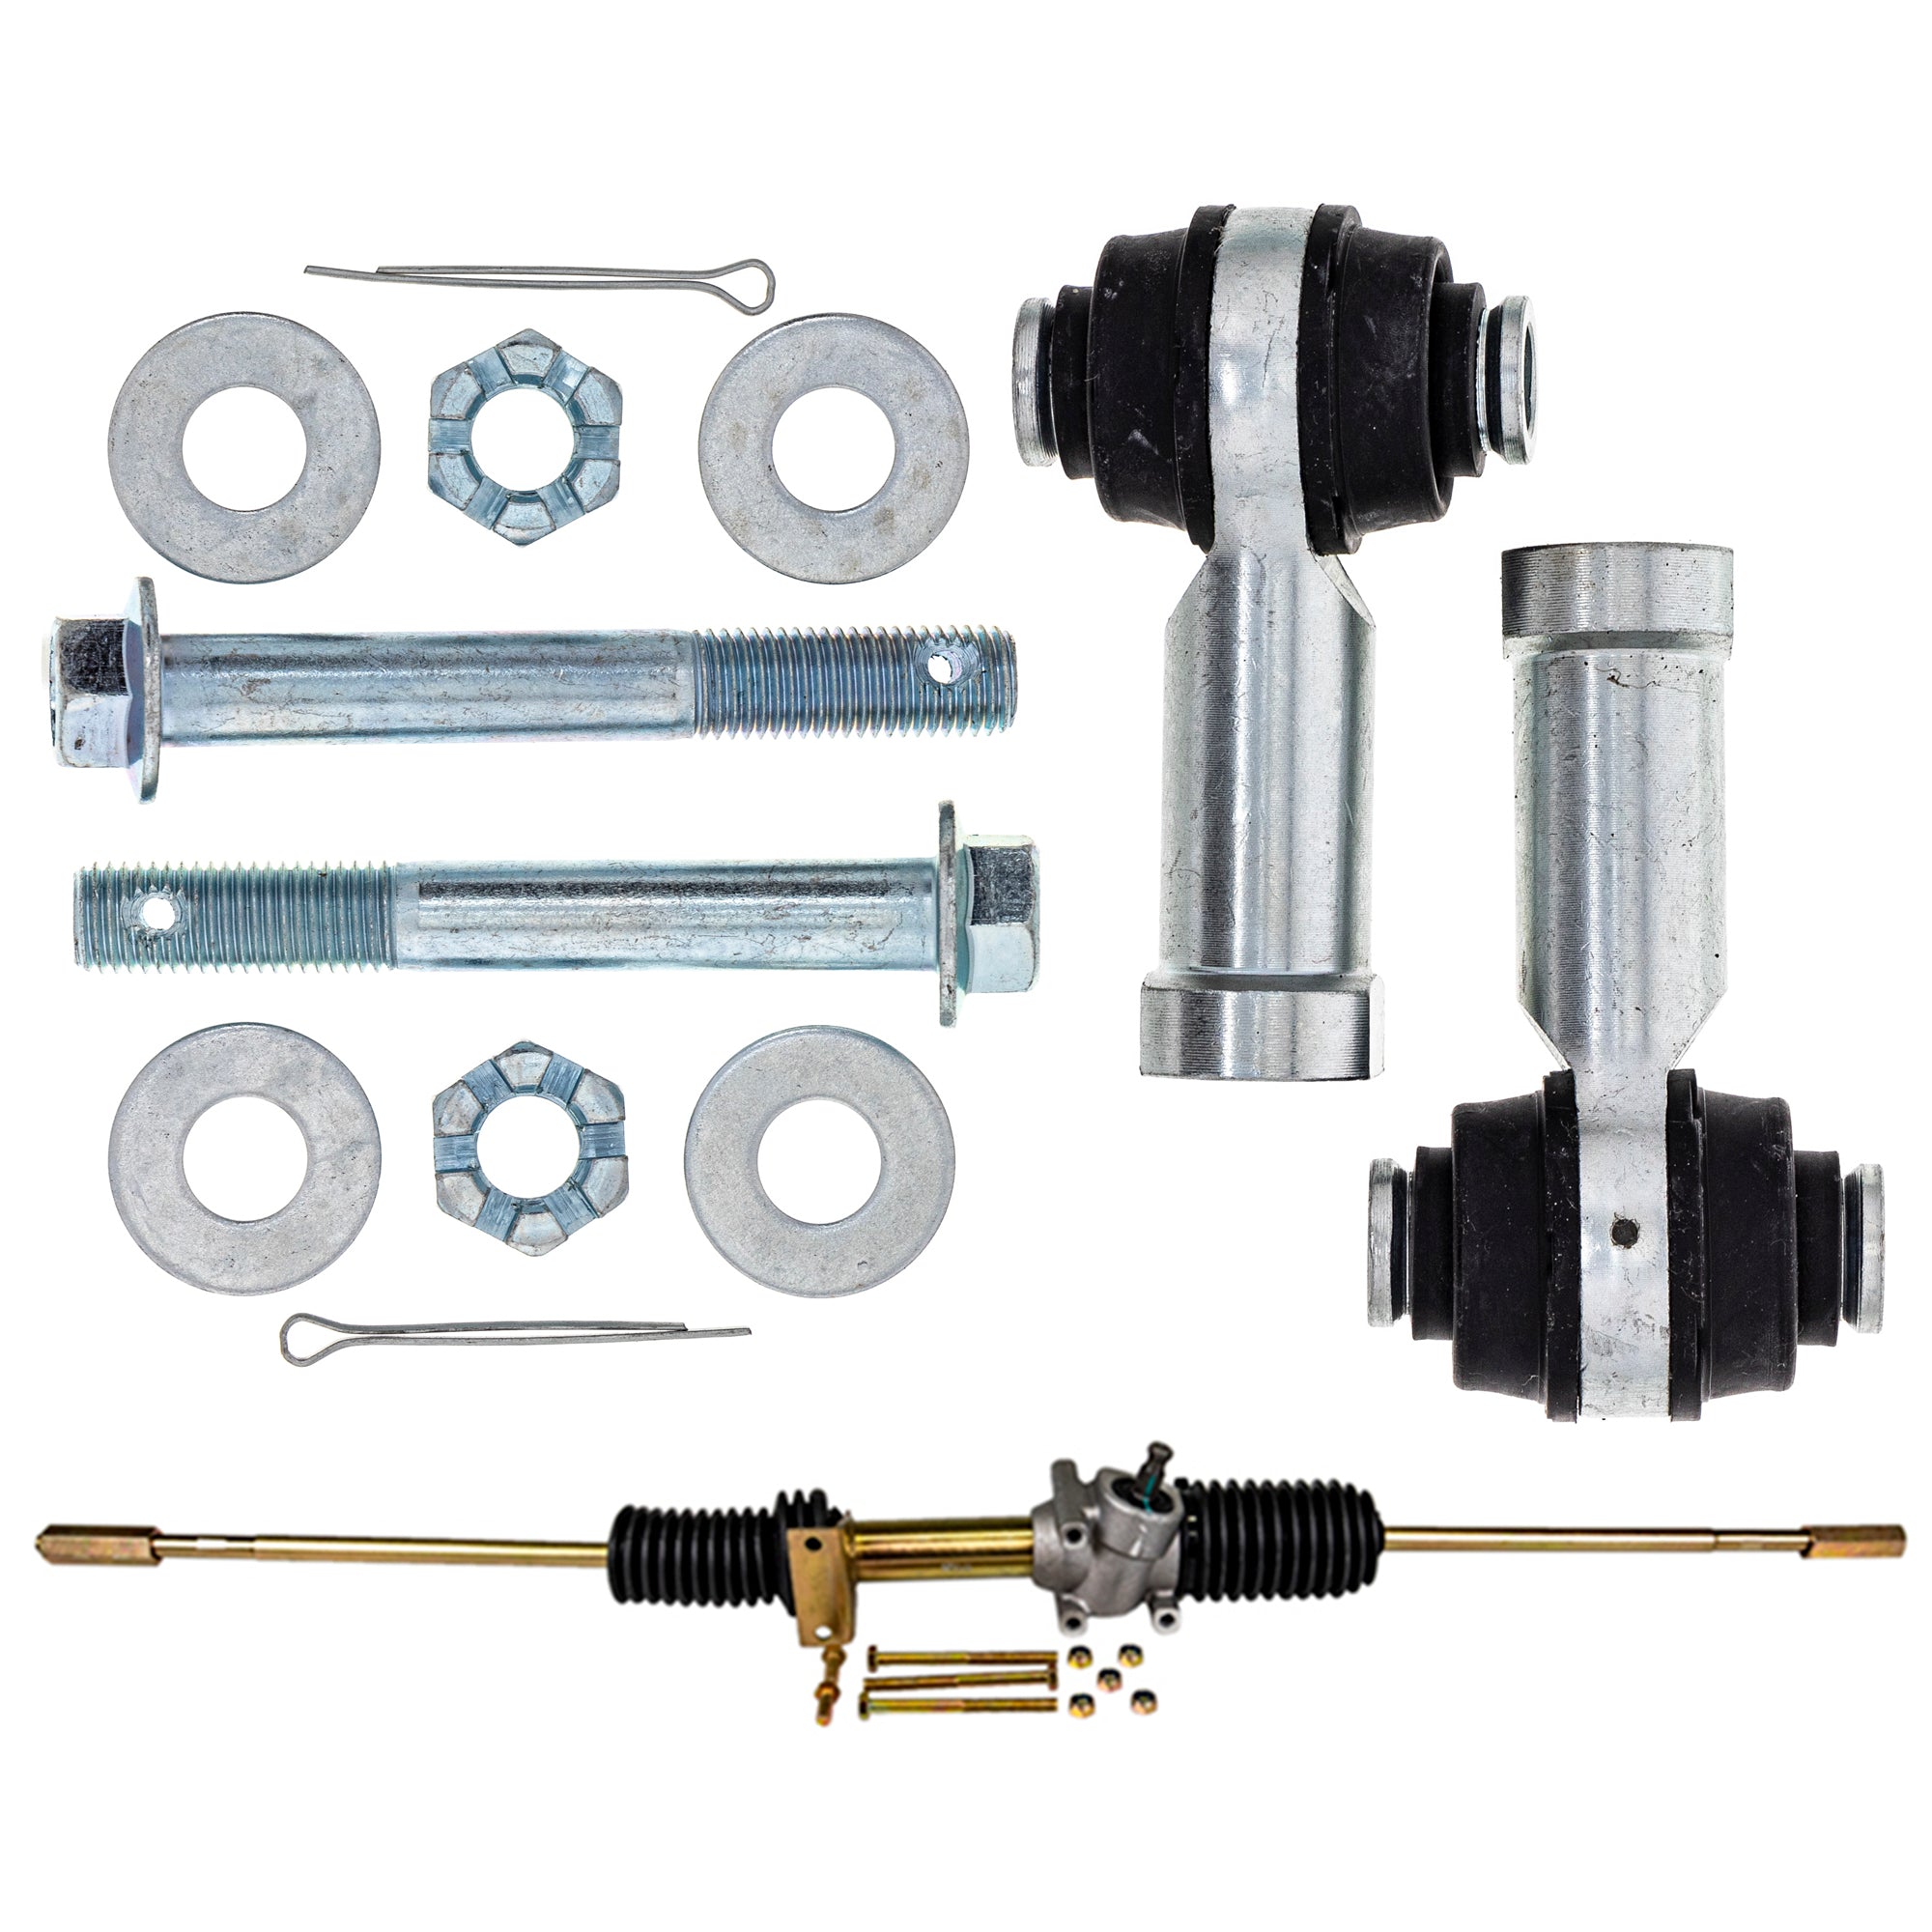 Steering Rack Assembly & Tie Rods Kit for zOTHER BRP Can-Am Ski-Doo Sea-Doo Commander NICHE MK1006184